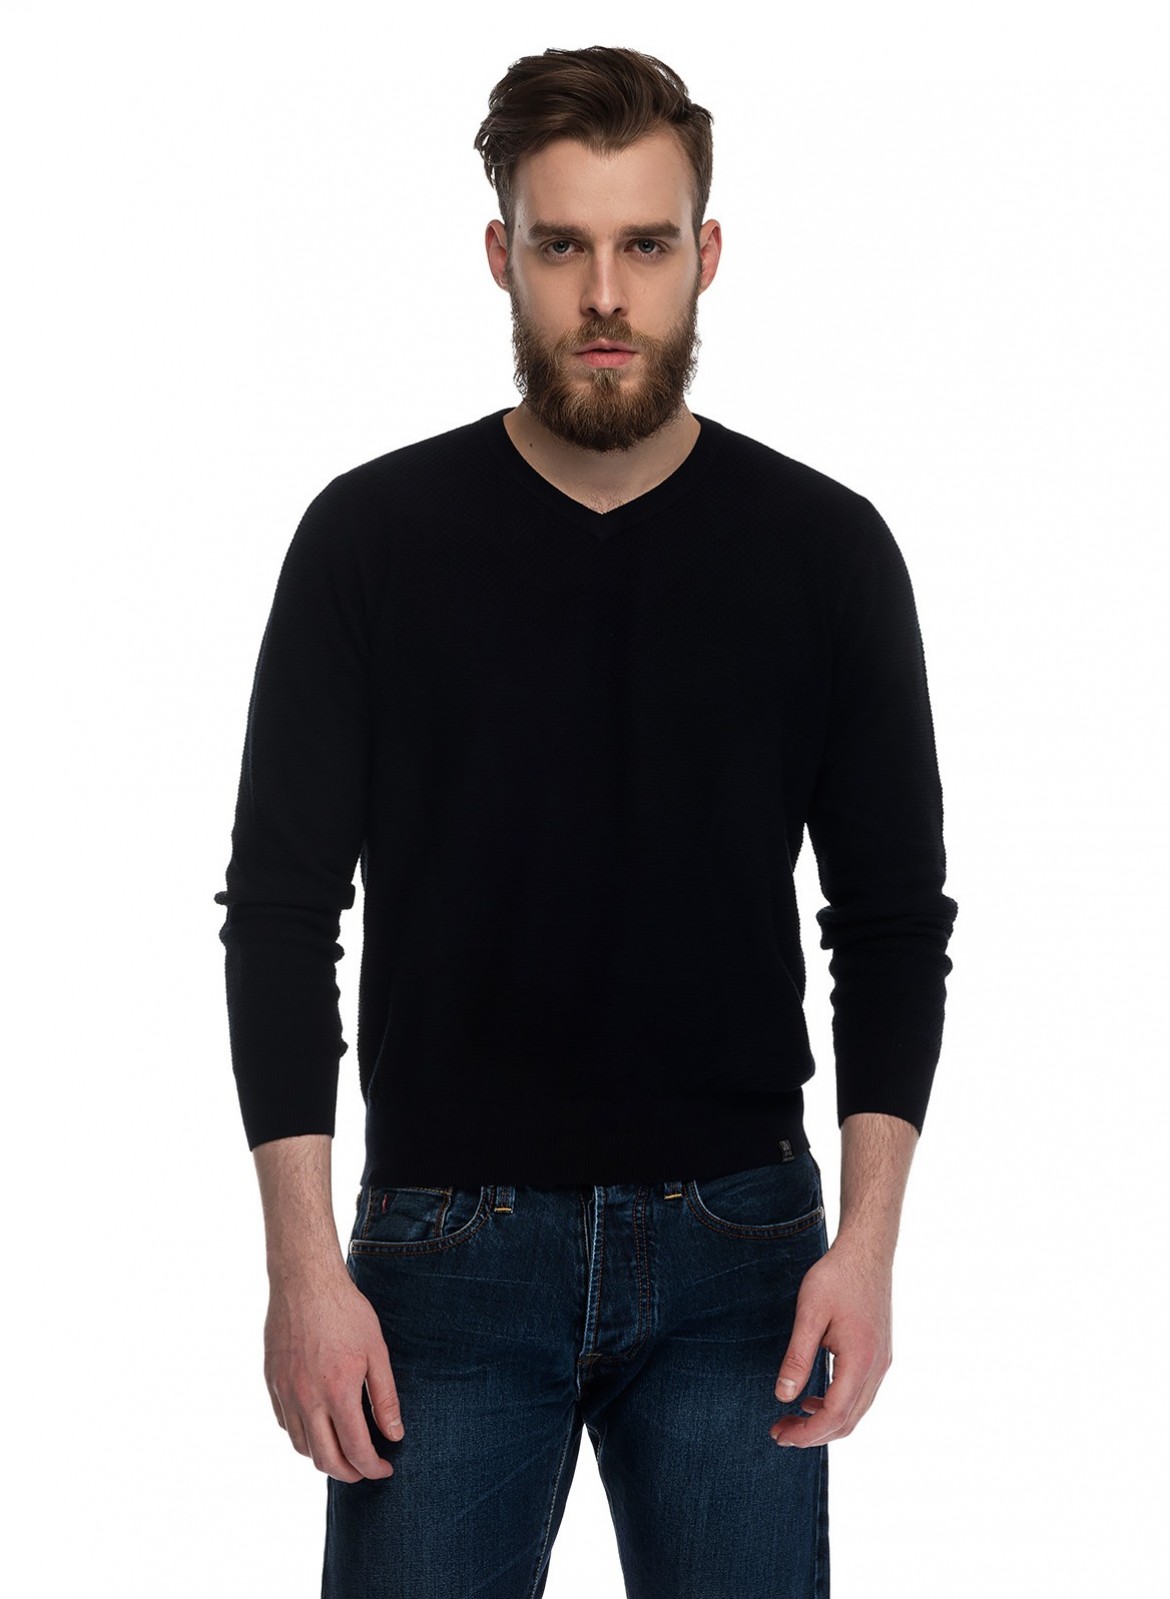 Light pullover with a V-shaped neck